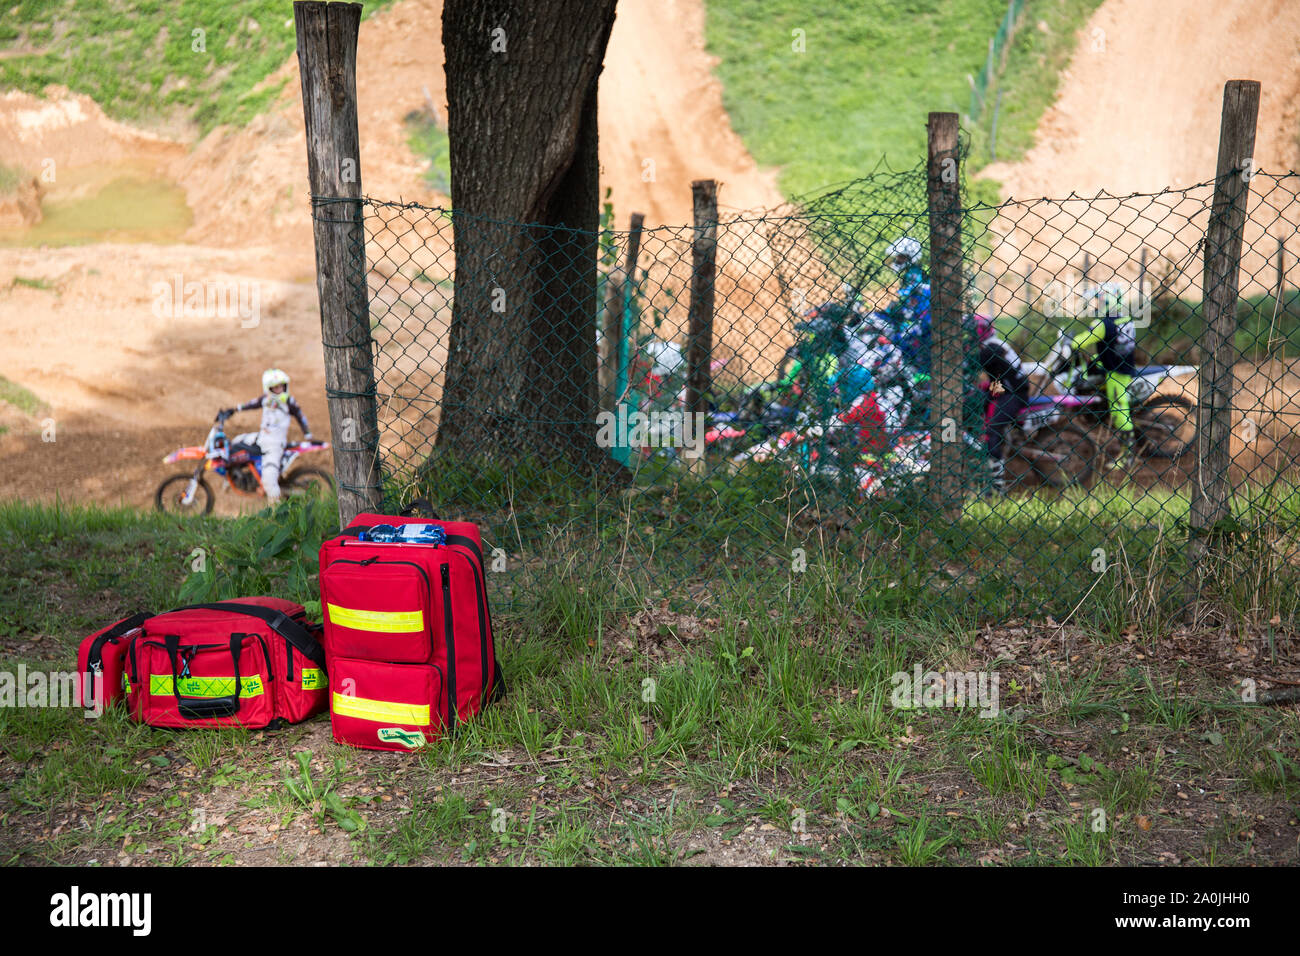 Giavera del Montello, Italy. 14 September 2019. Paramedics bags laying next to a tree with motorcyclists in the background. Credit: Lukasz Obermann/Alamy Live News Stock Photo